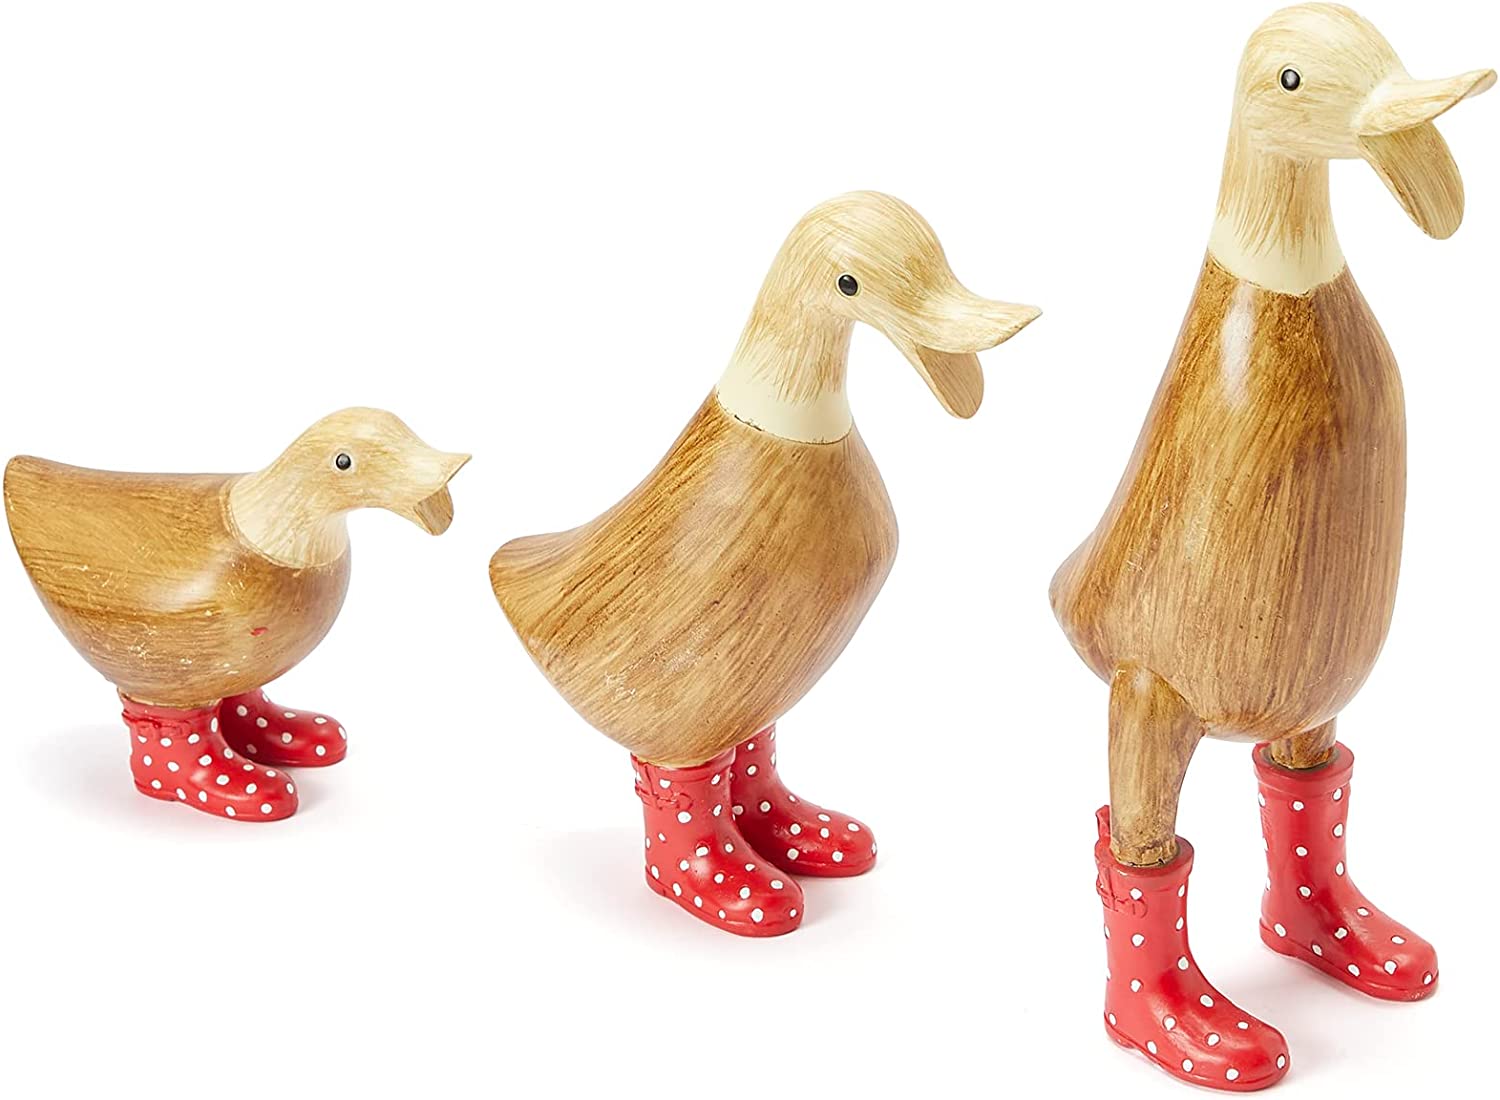 Three garden ducks made out of wood. Each duck is in a different pose wearing red spotted wellington boots.